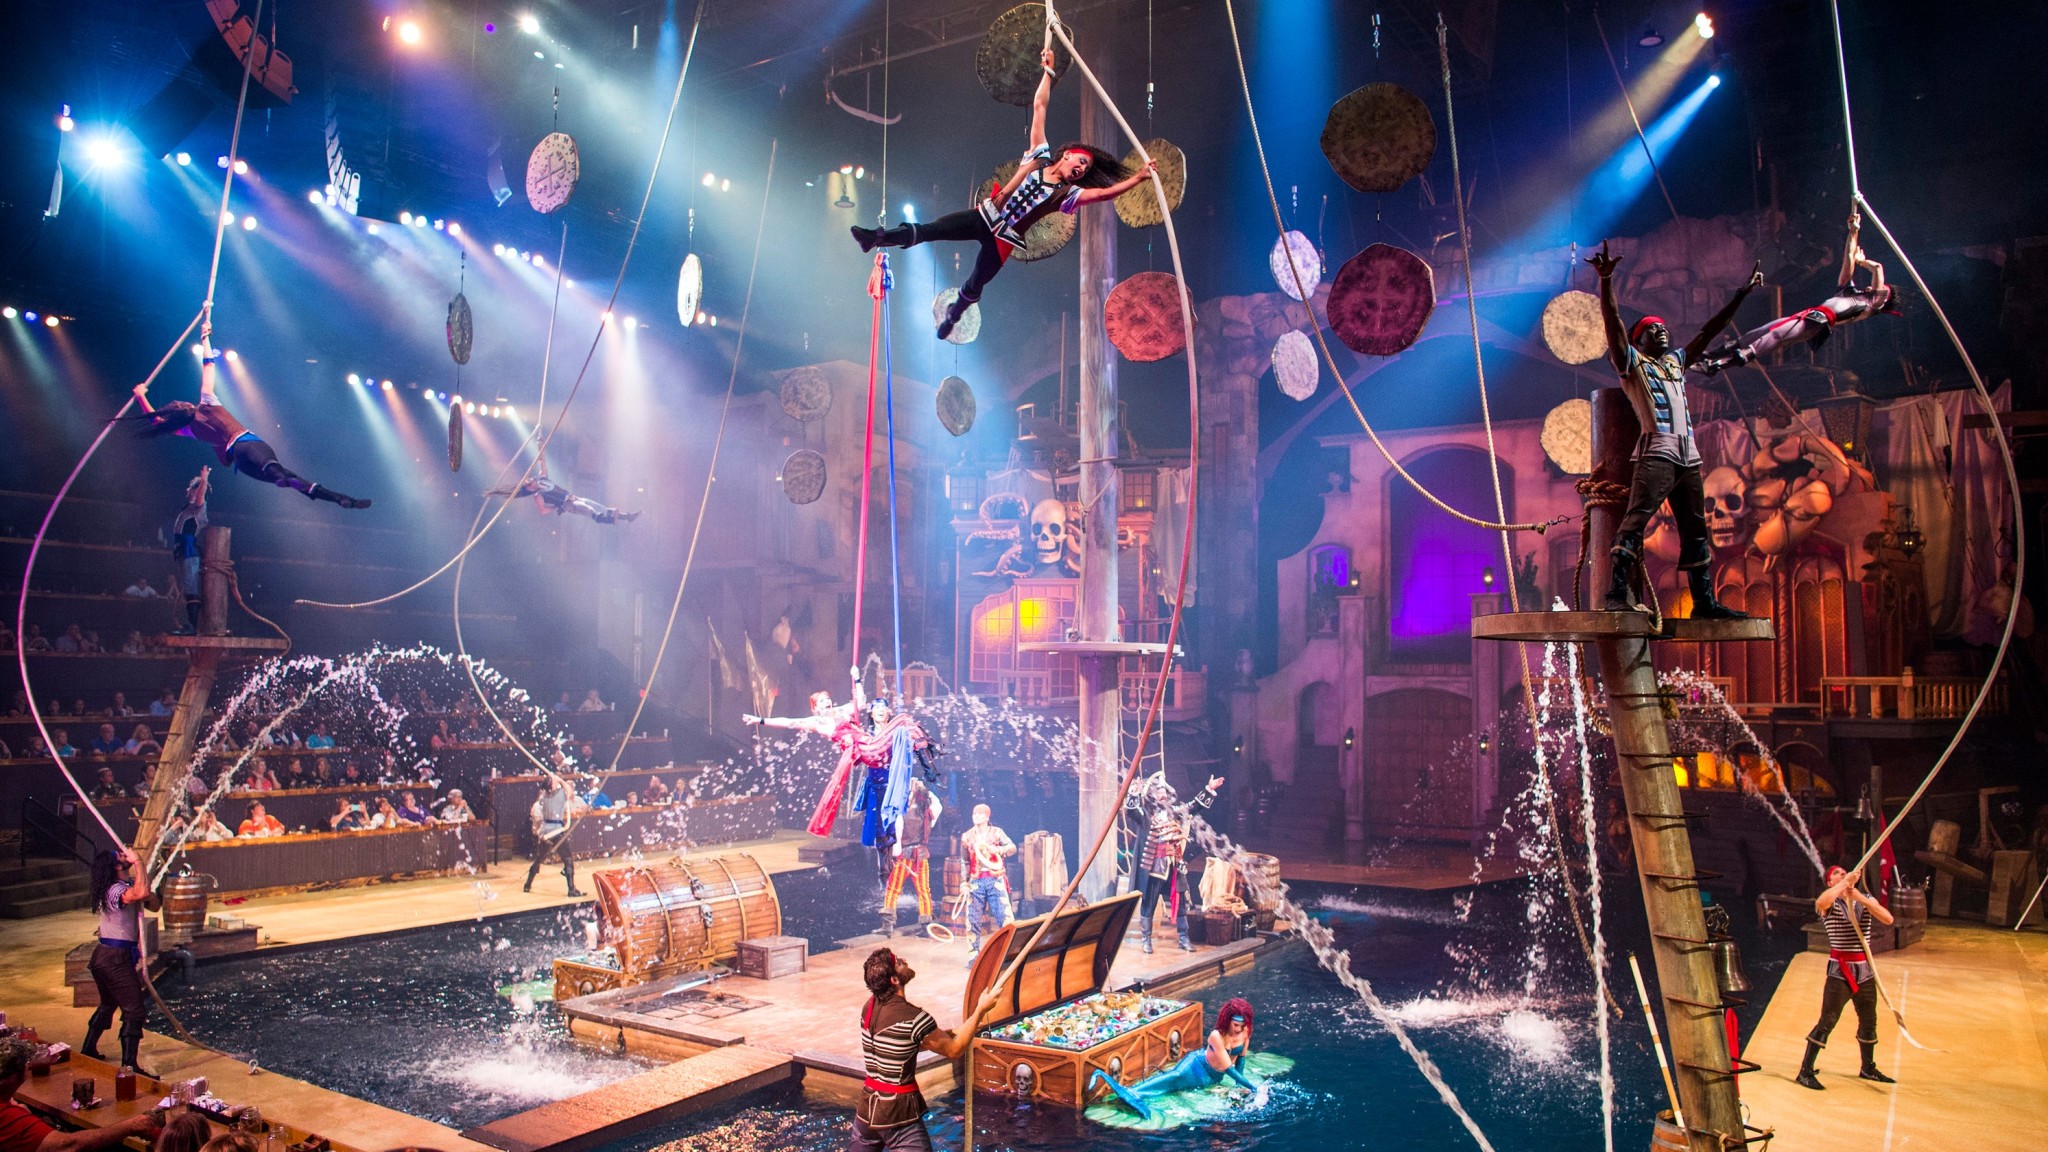 pirates voyage dinner and show discounts